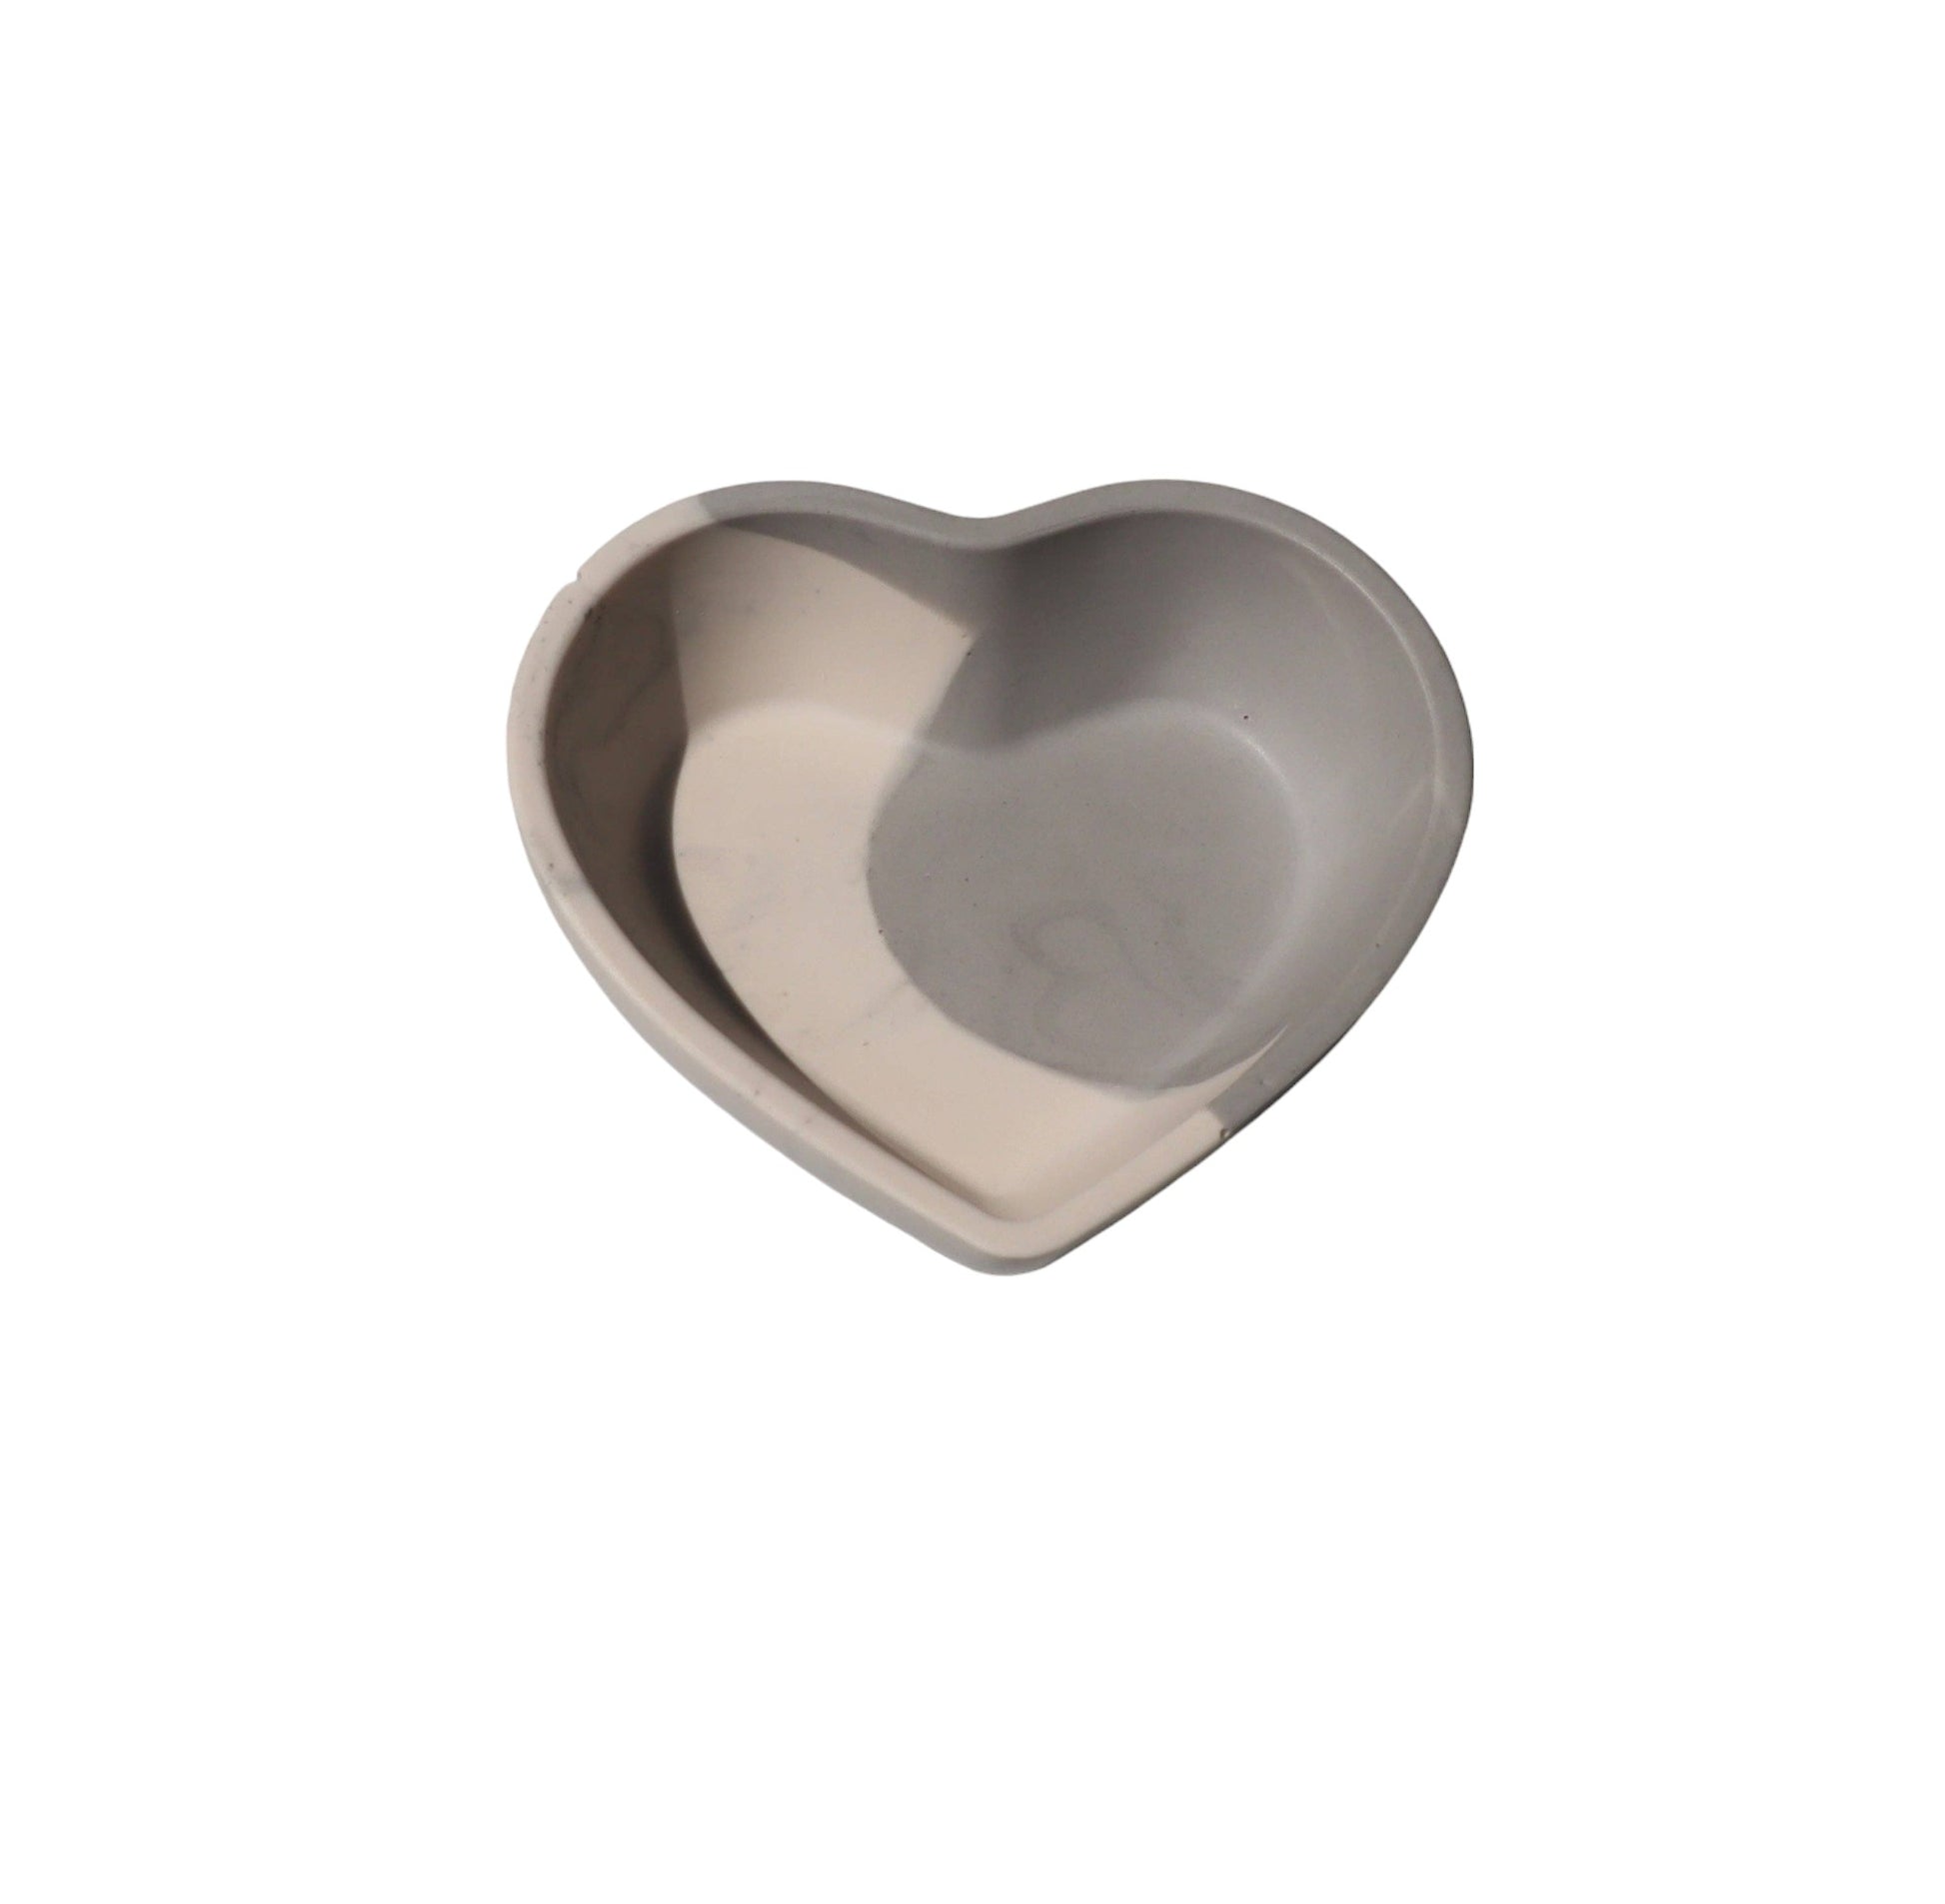 Small heart shaped dish in off white and gray 